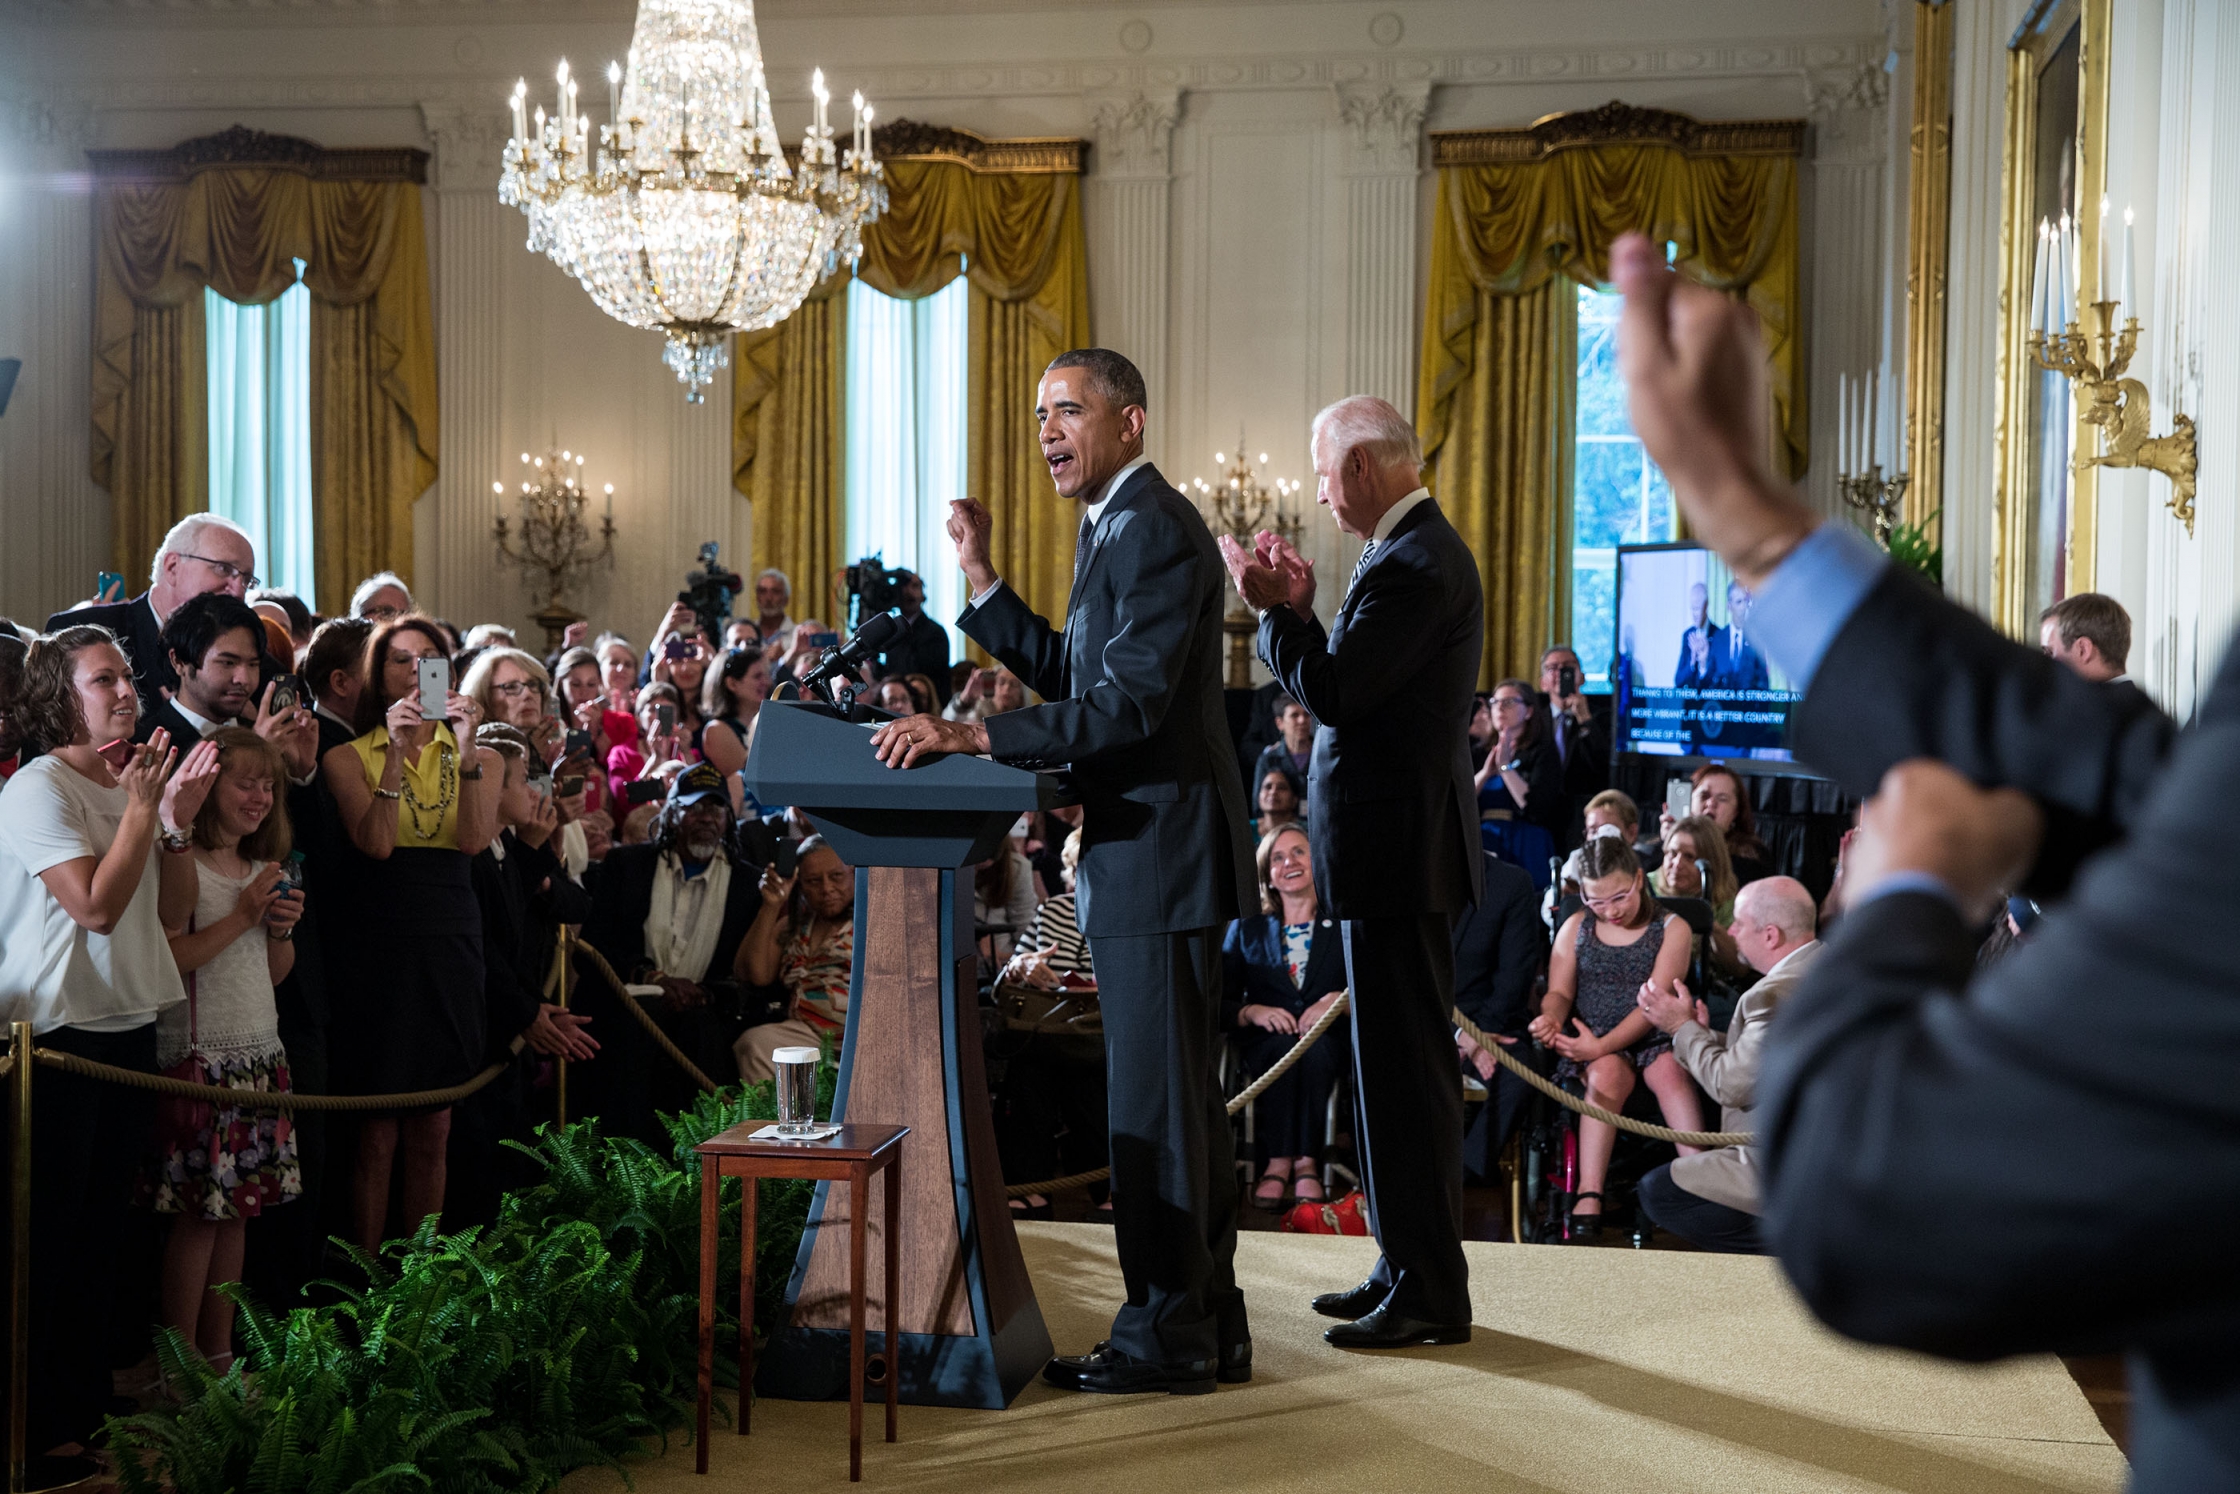 An interpreter signs in the foreground while President Barack Obama, with Vice President Joe Biden, delivers remarks during a reception for the 25th anniversary of the Americans with Disabilities Act (ADA) in the East Room of the White House, July 20, 2015. (Official White House Photo by Pete Souza)